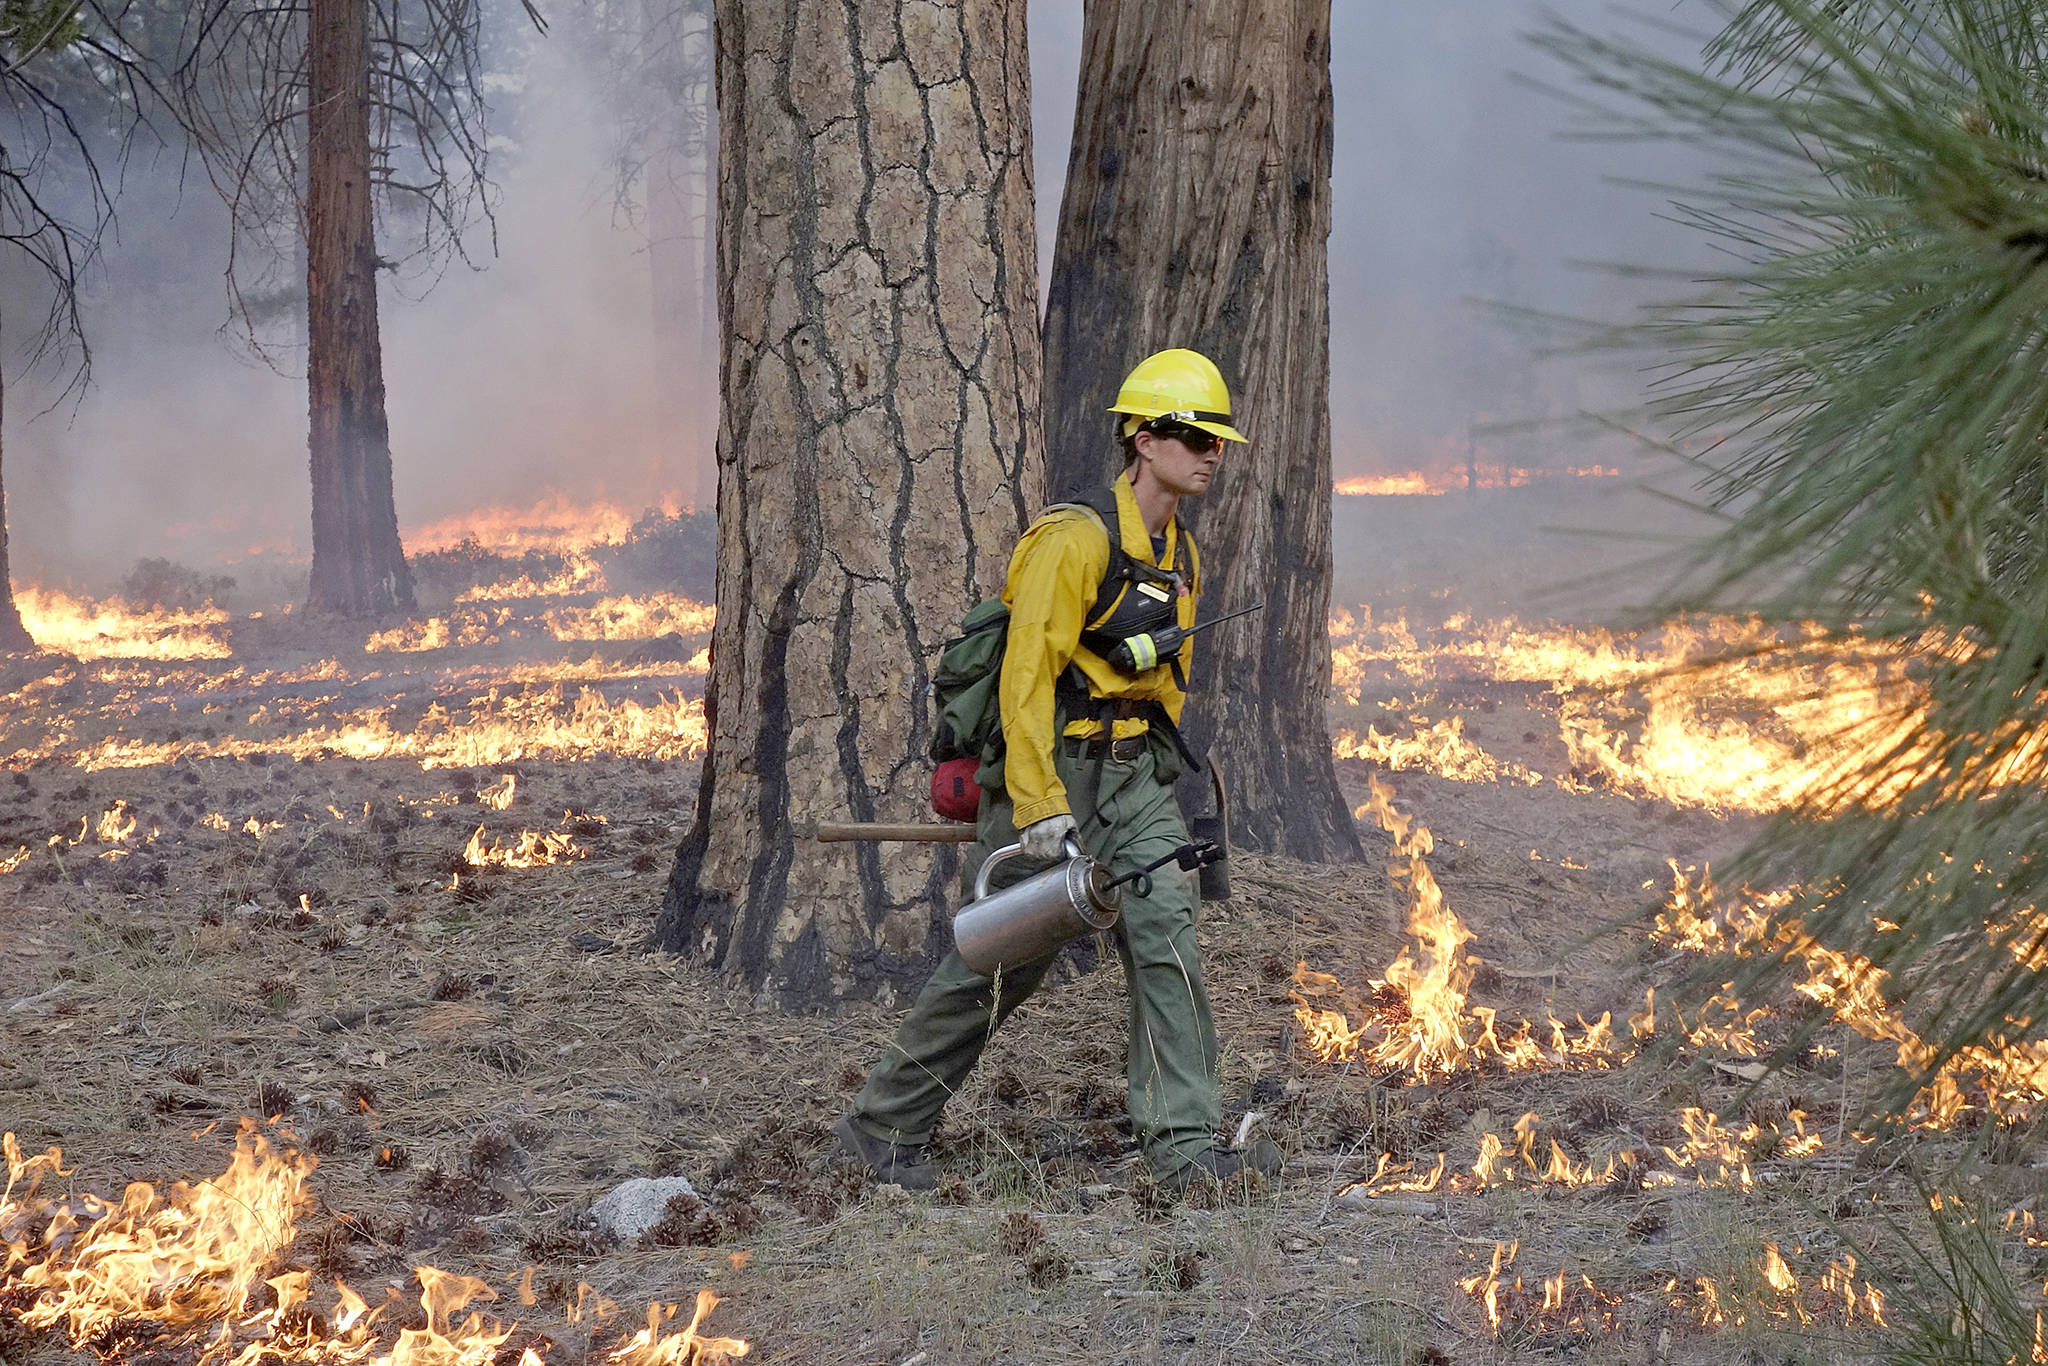 COVID-19 expected to complicate wildfire season for state officials